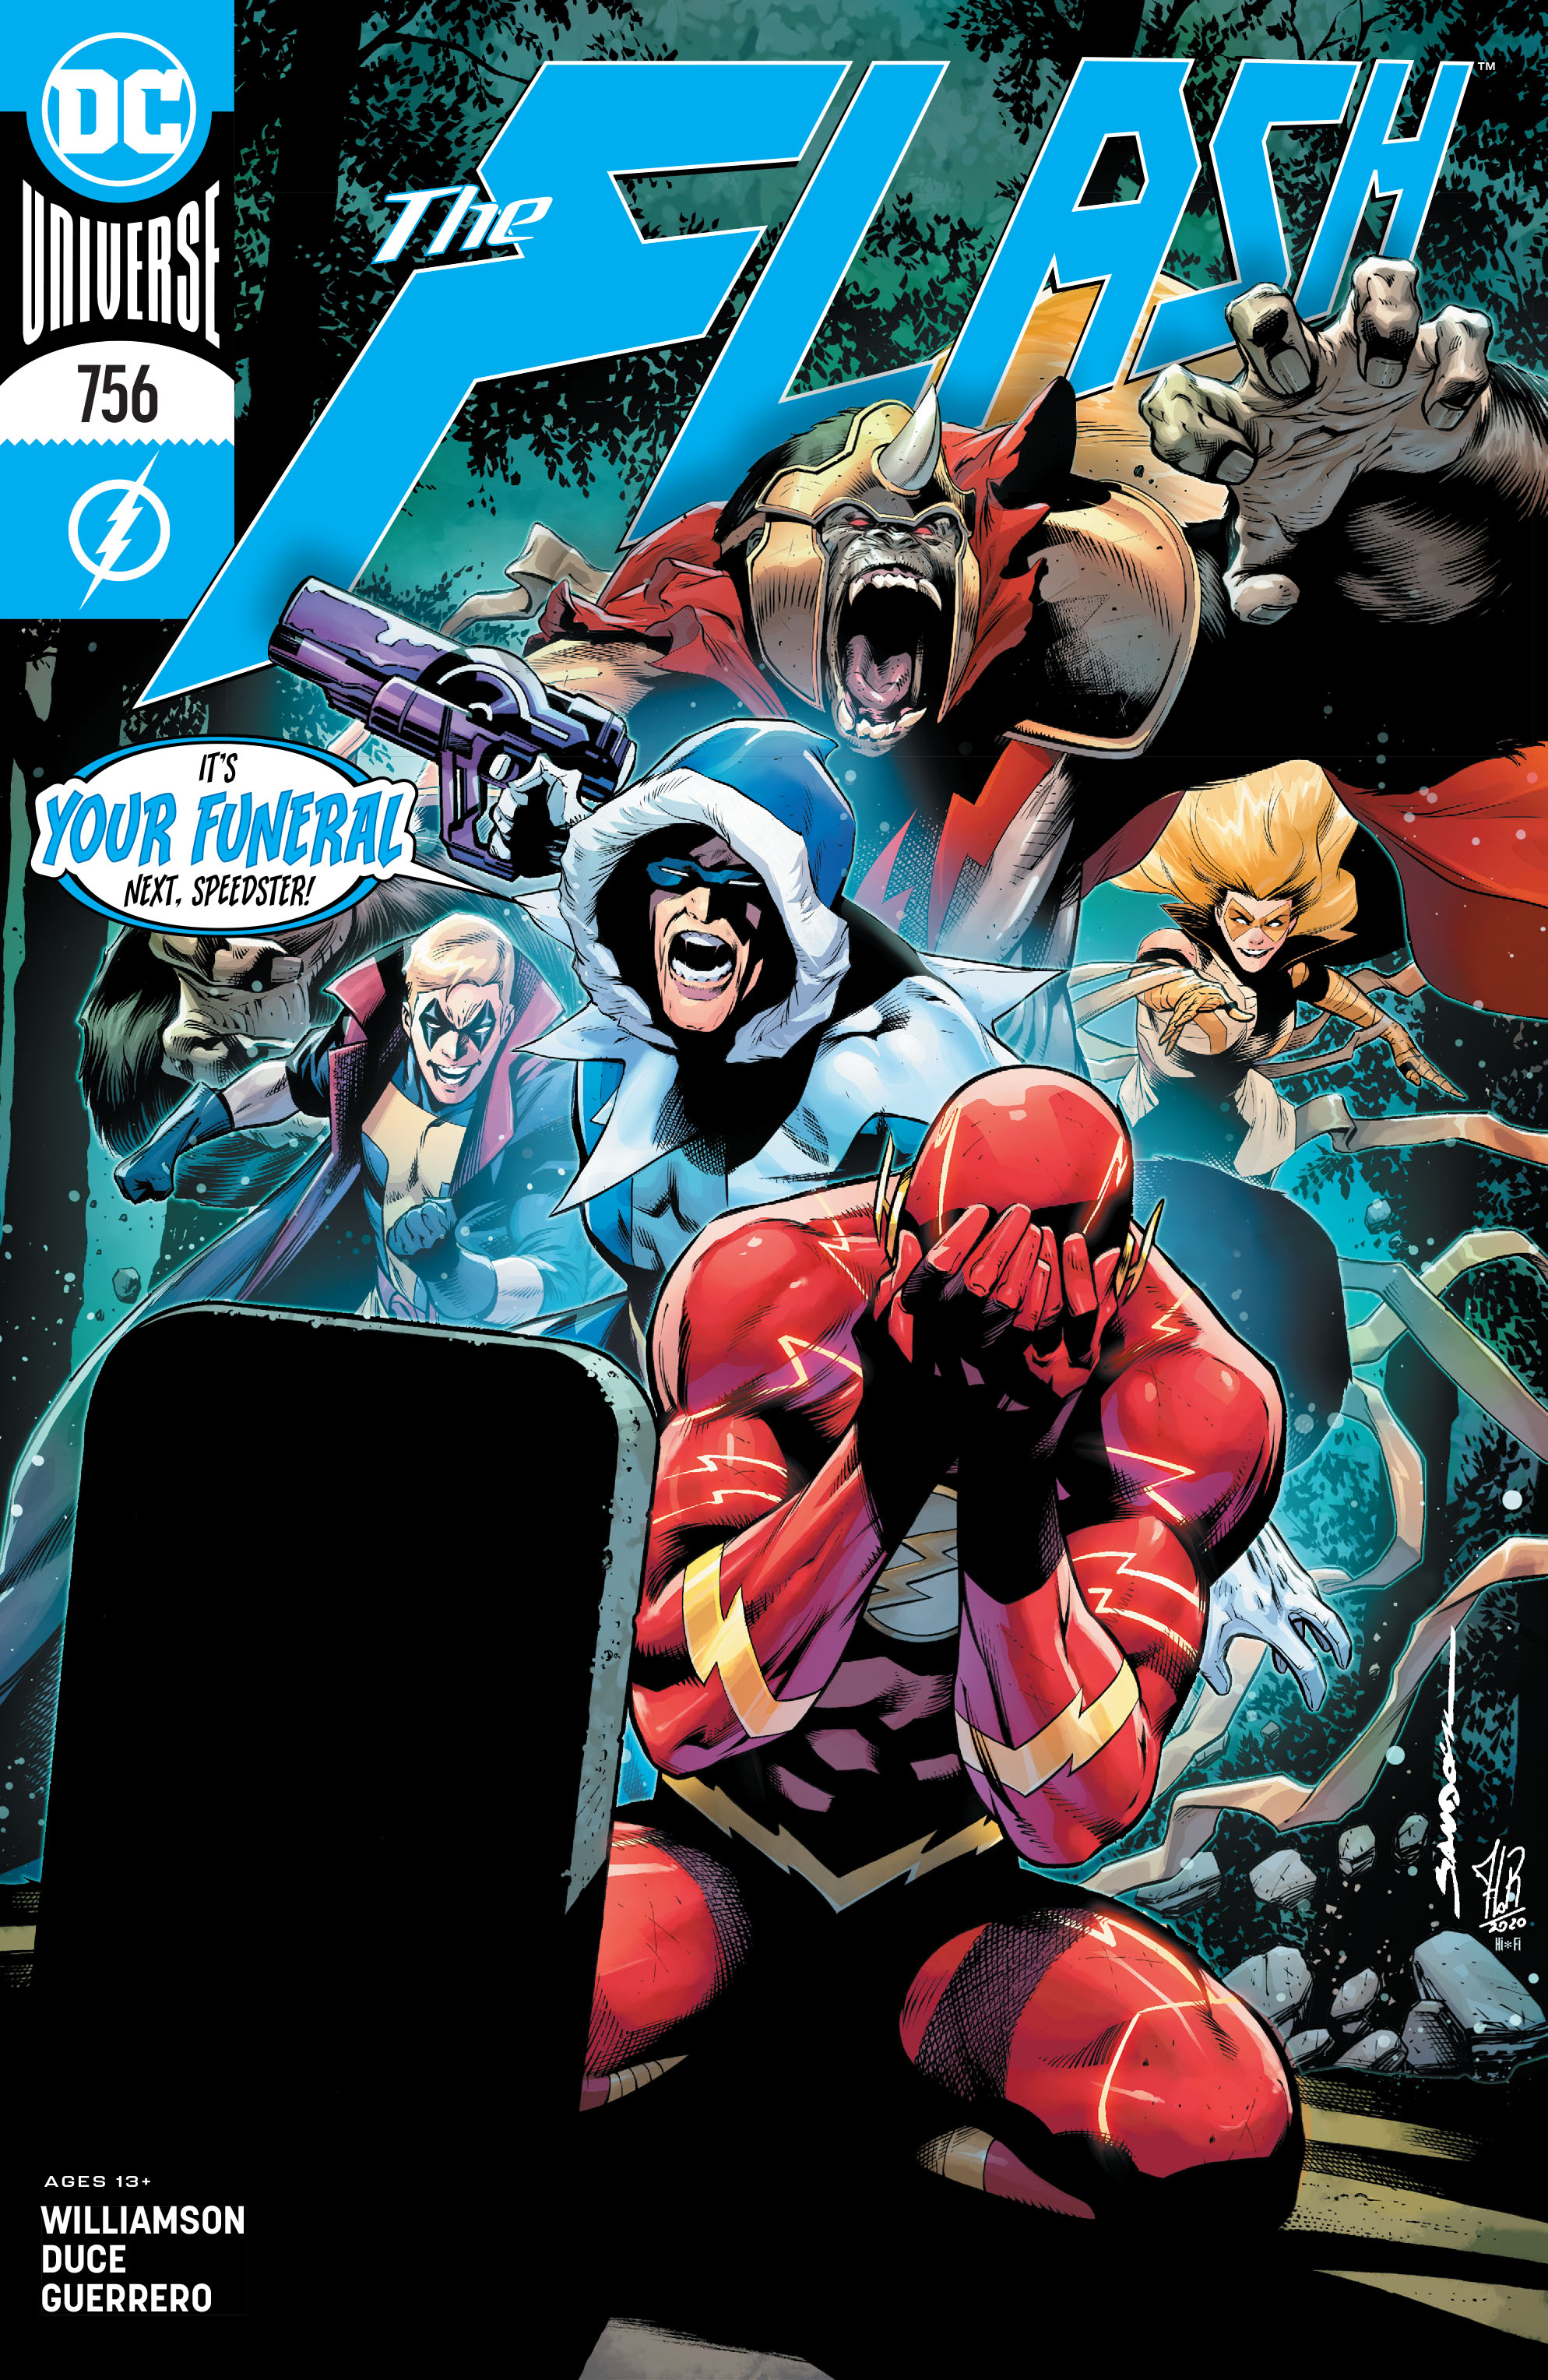 The Flash (2016-): Chapter 756 - Page 1